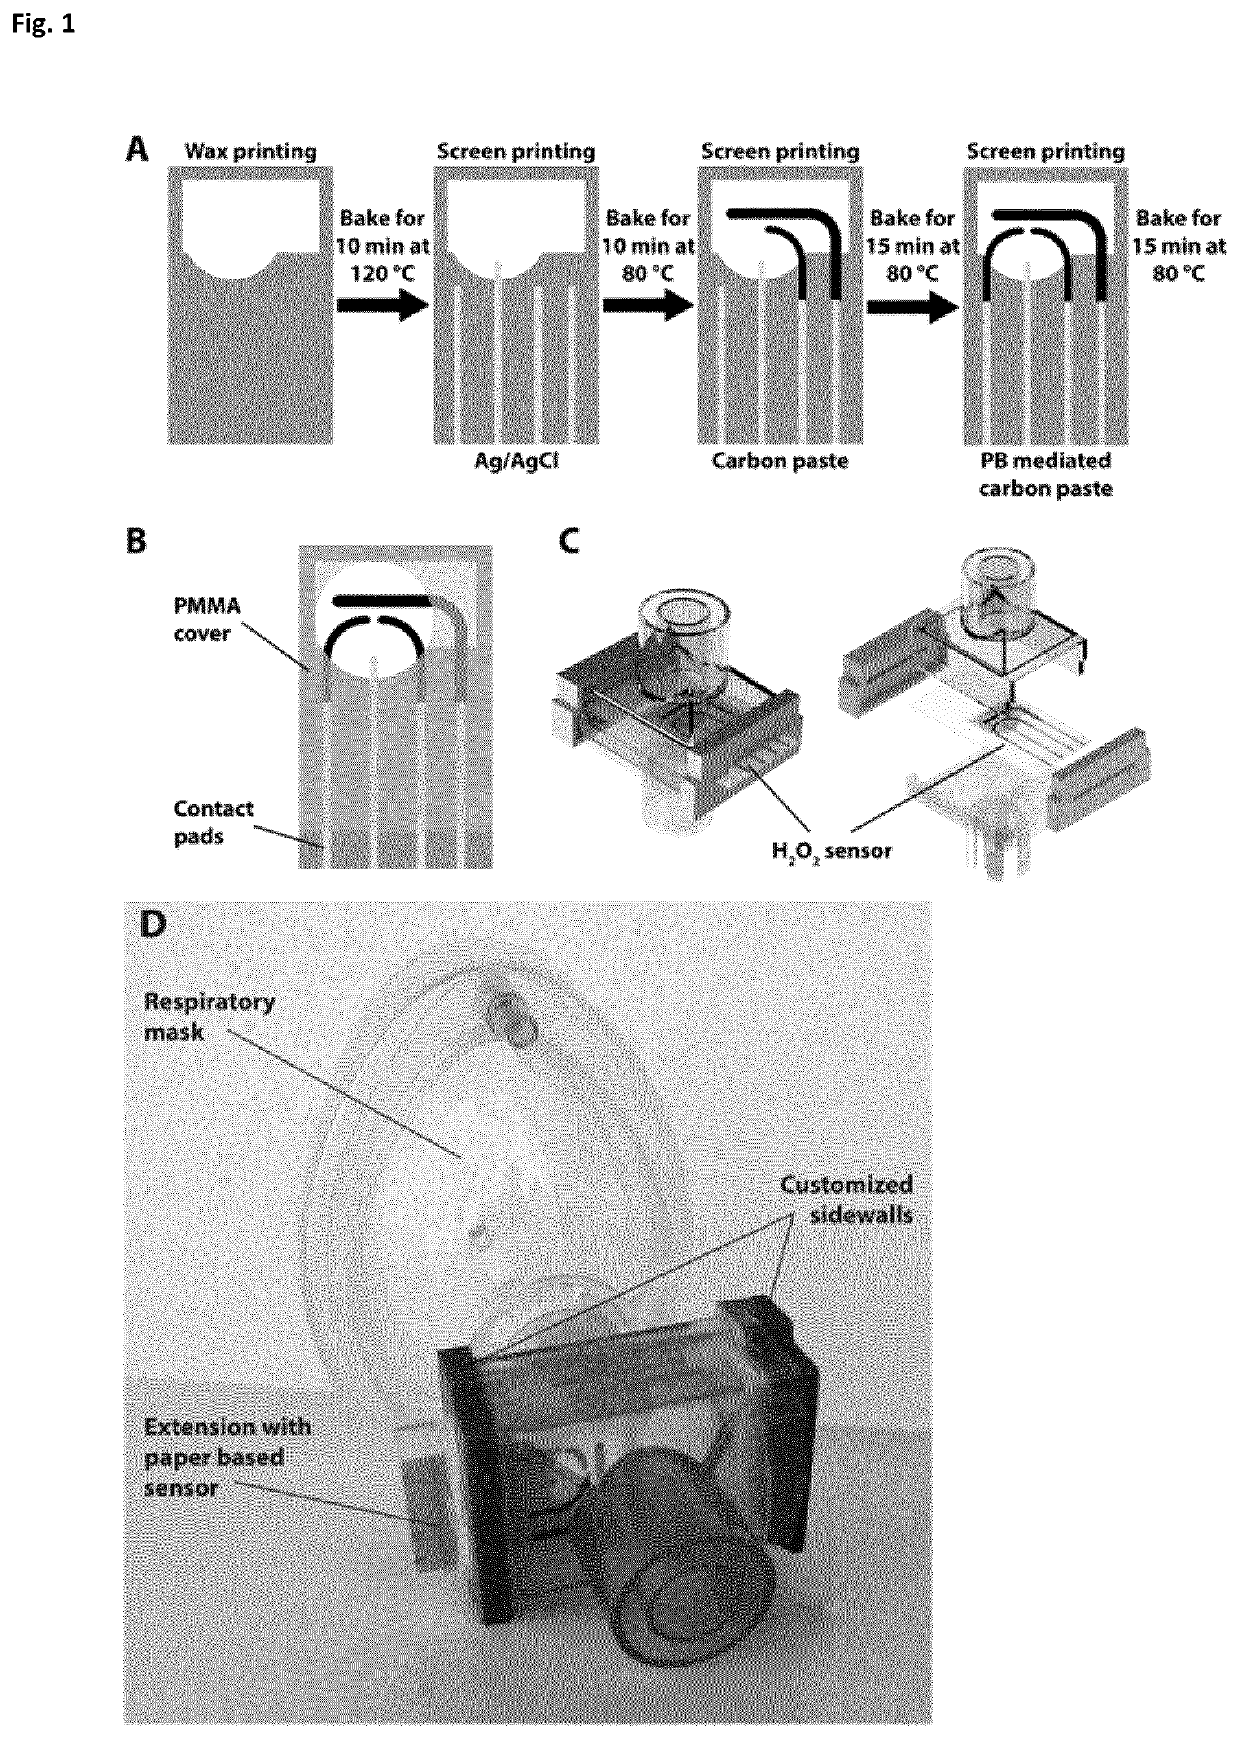 Disposable wearable sensor for continuous monitoring of breath biochemistry